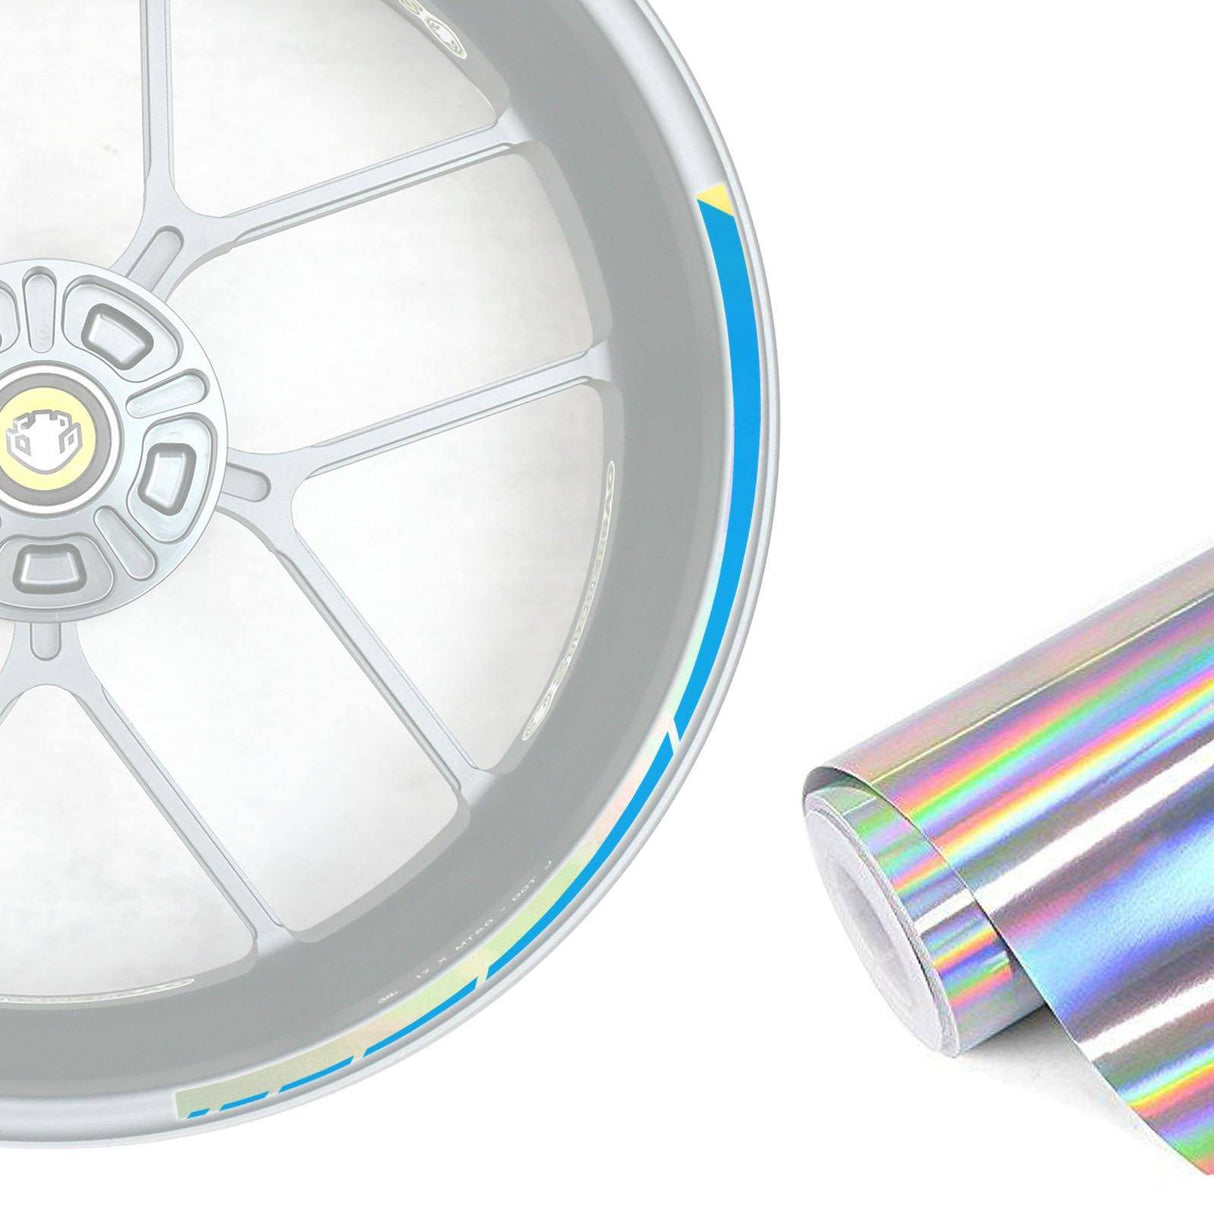 17 inch Rim Silver Holographic Wheel Stickers J03 Rim Skin Decal Strip | For Ducati Panigale 1199 1299 899 959.